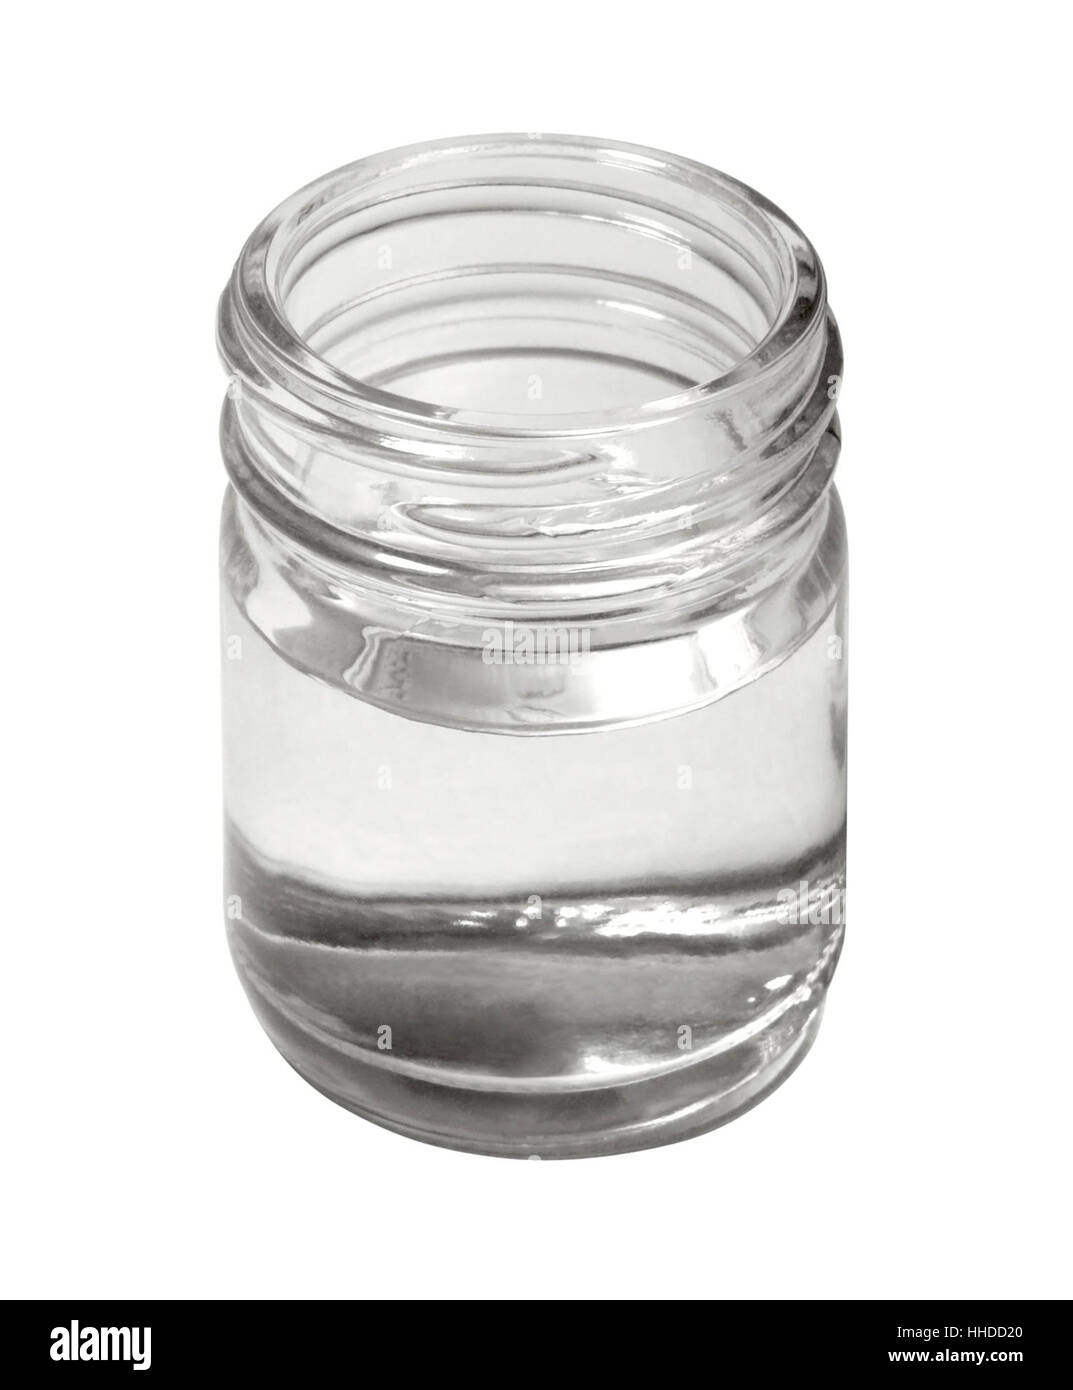 studio photography of a open glass with screwtop, filled with clear fluid, isolated on white with clipping path Stock Photo